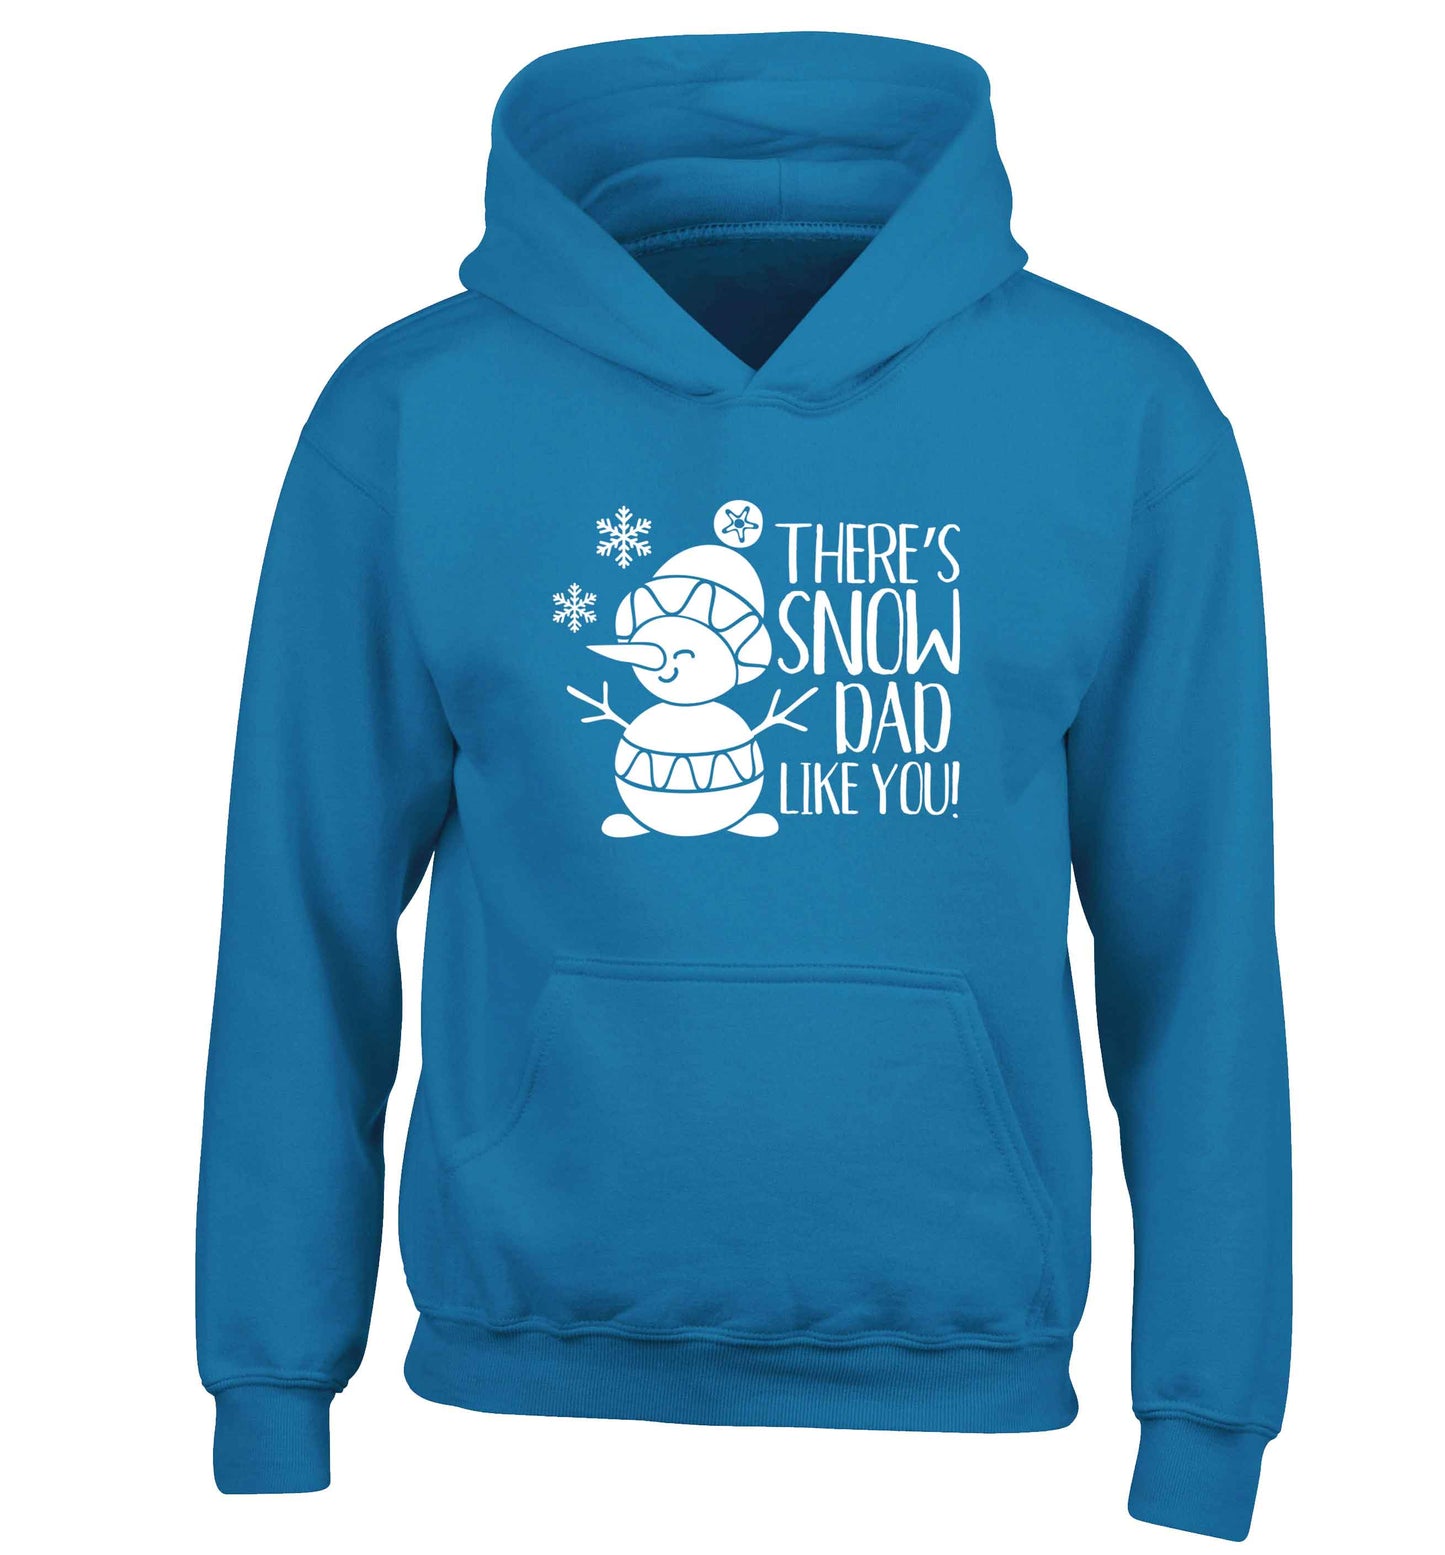 There's snow dad like you children's blue hoodie 12-13 Years